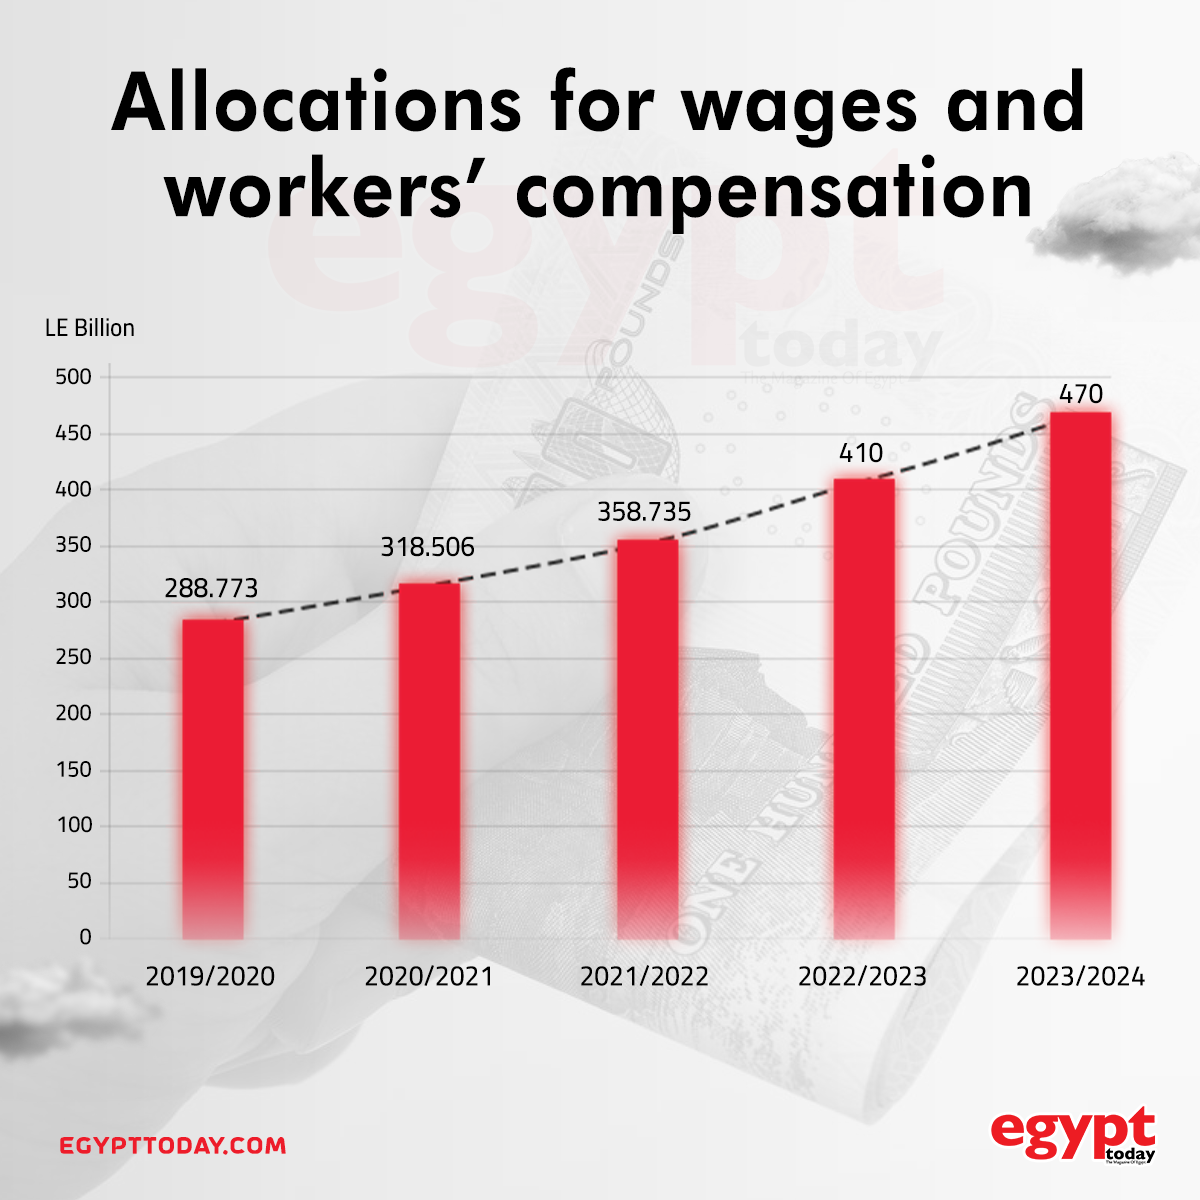 ET - Allocations for wages and workers’ compensation